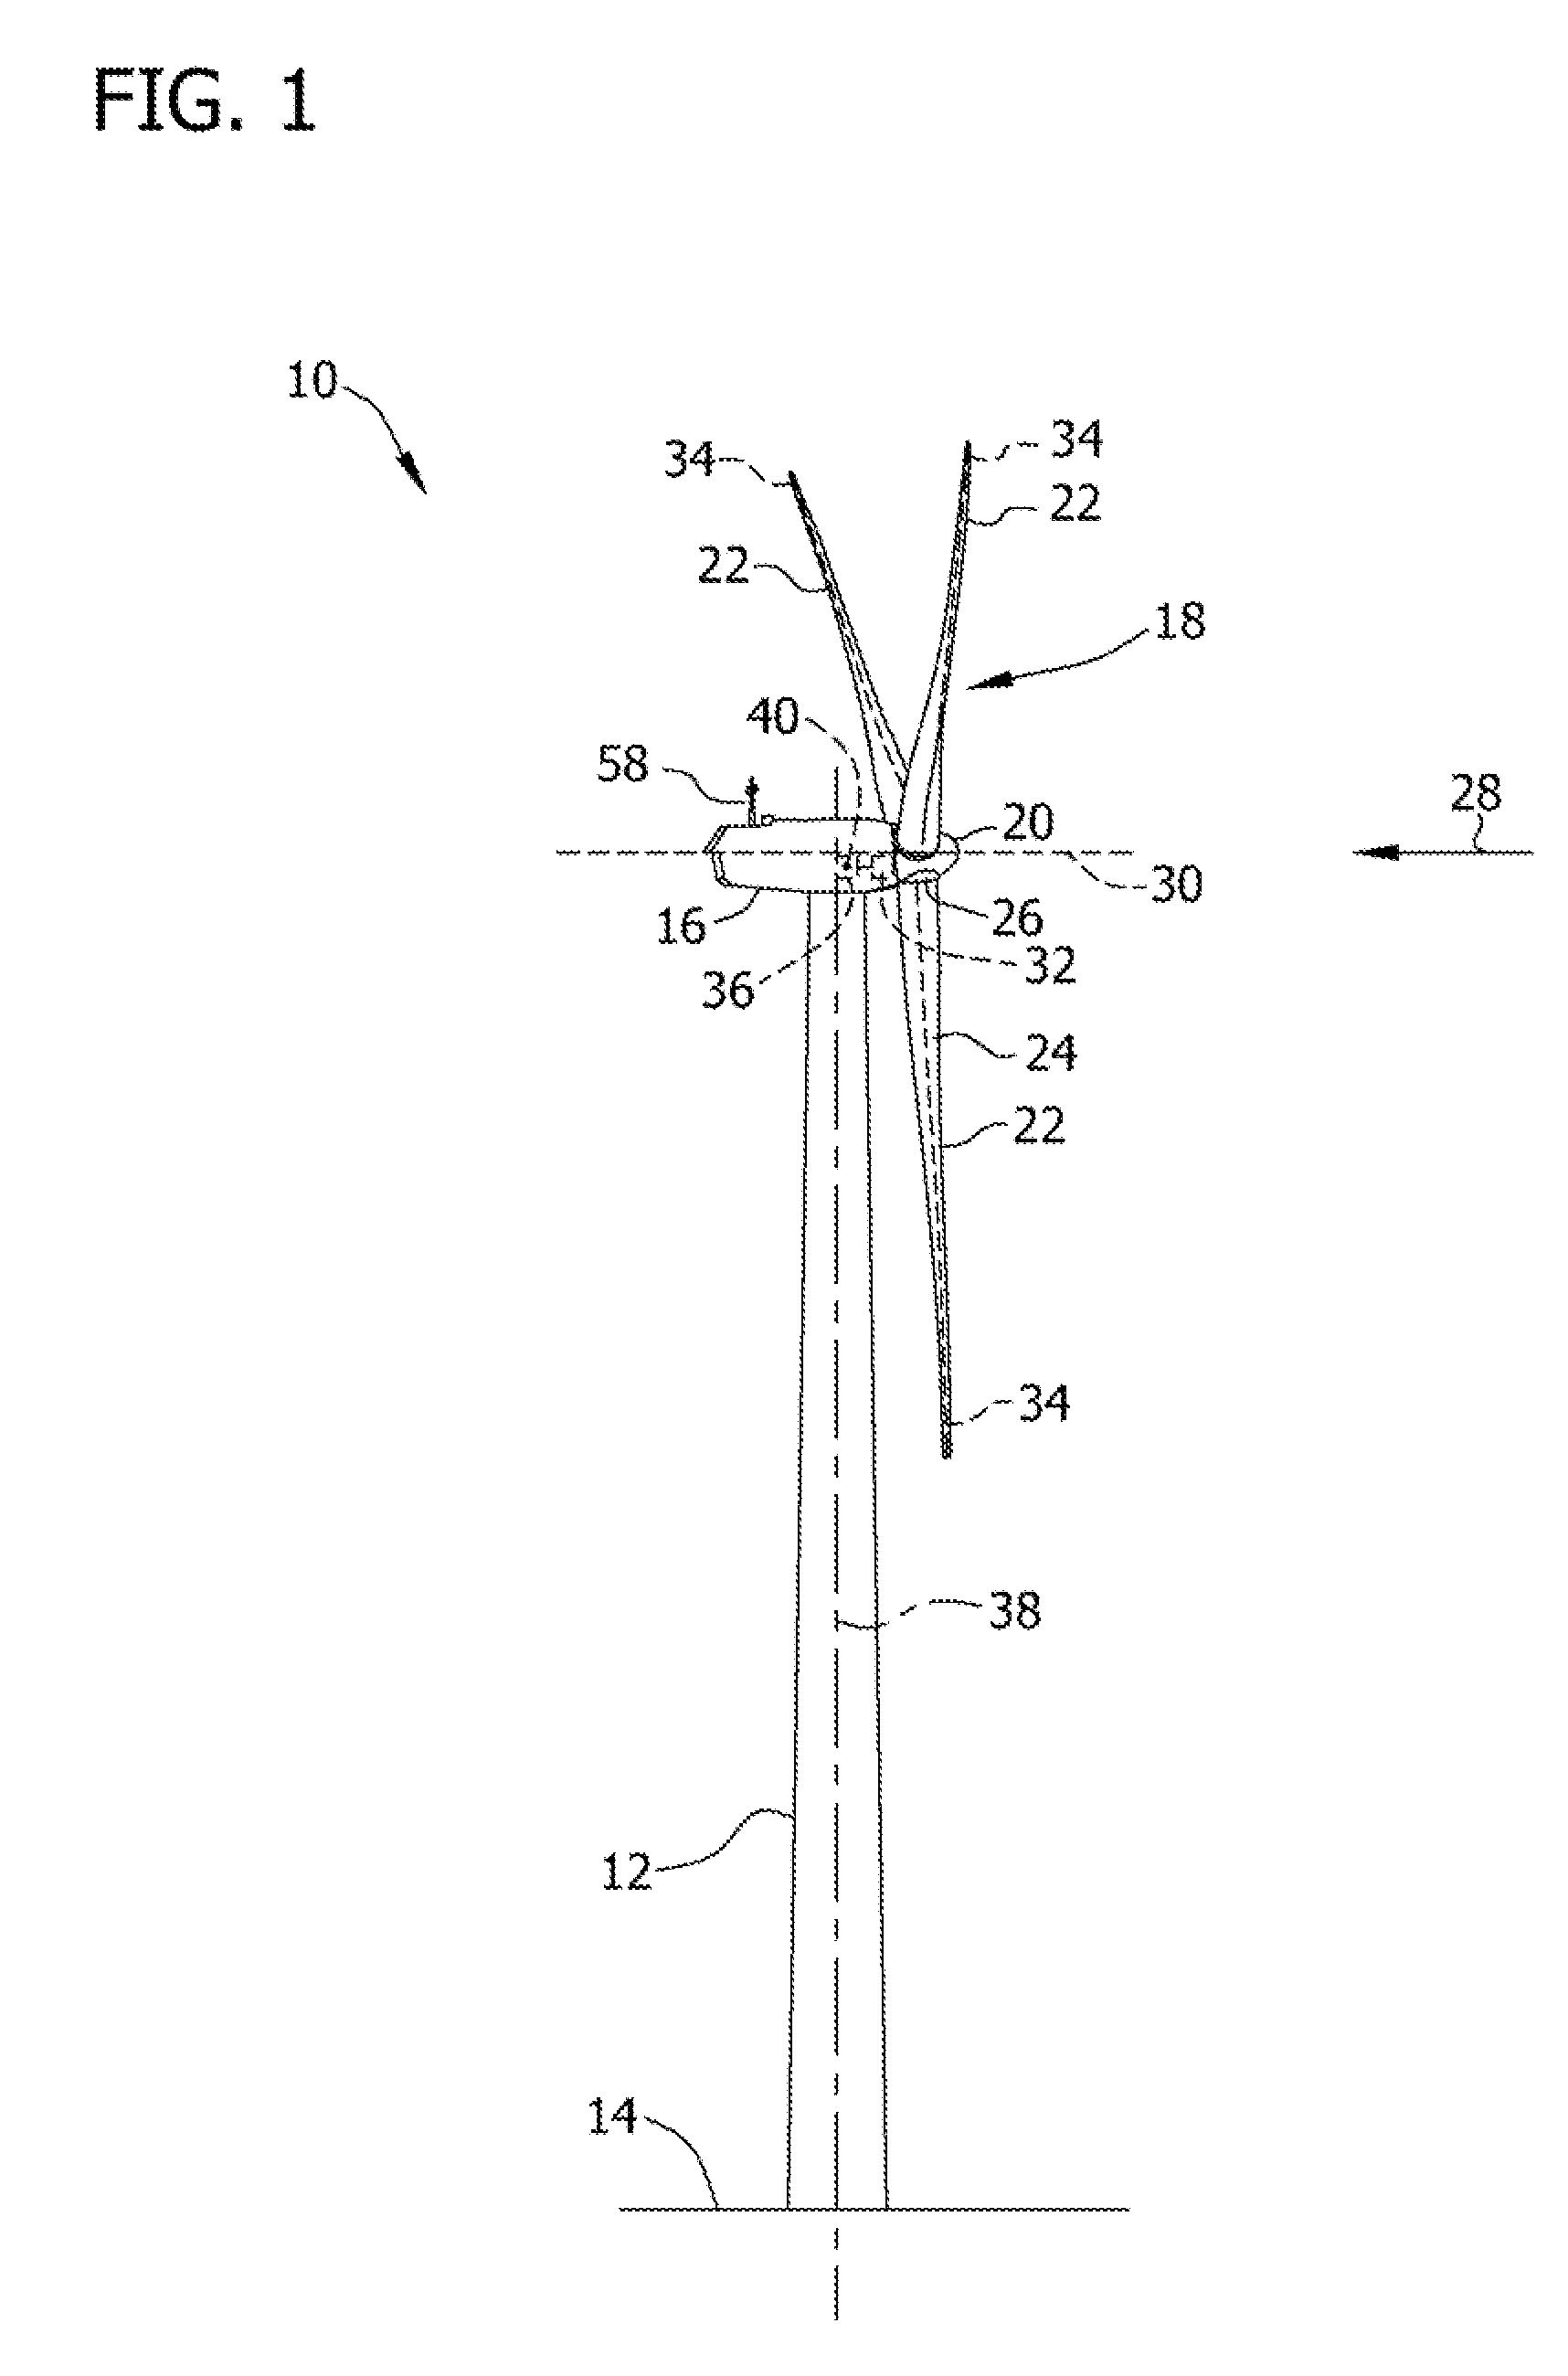 Method for preventing rotor overspeed of a wind turbine